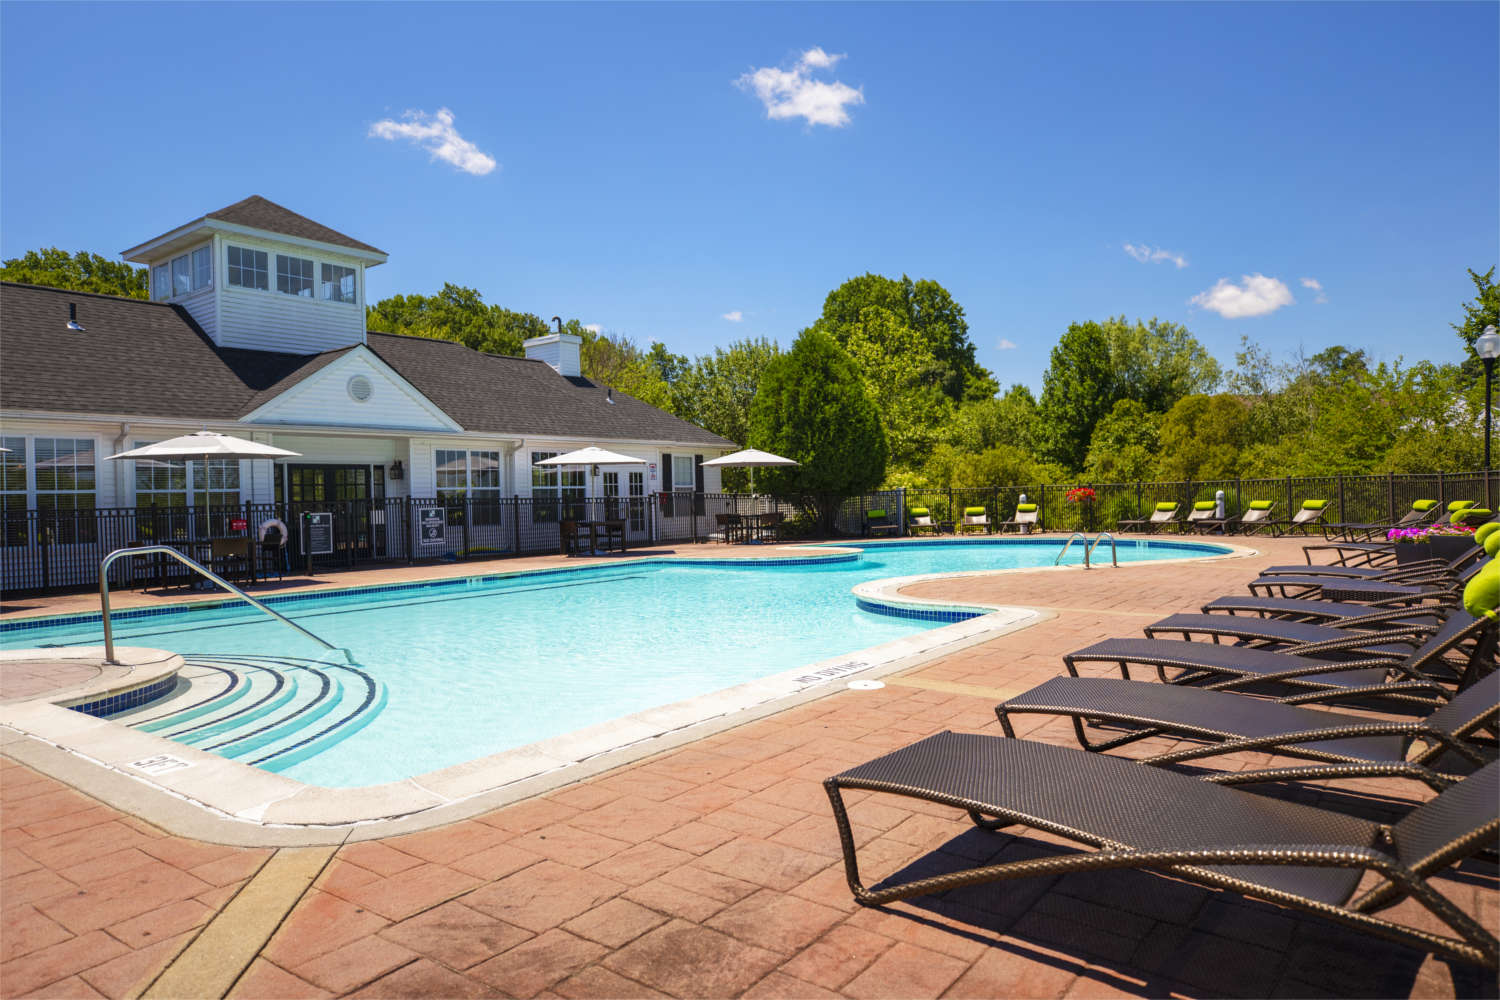 Willow Grove Apartment Homes : Pool